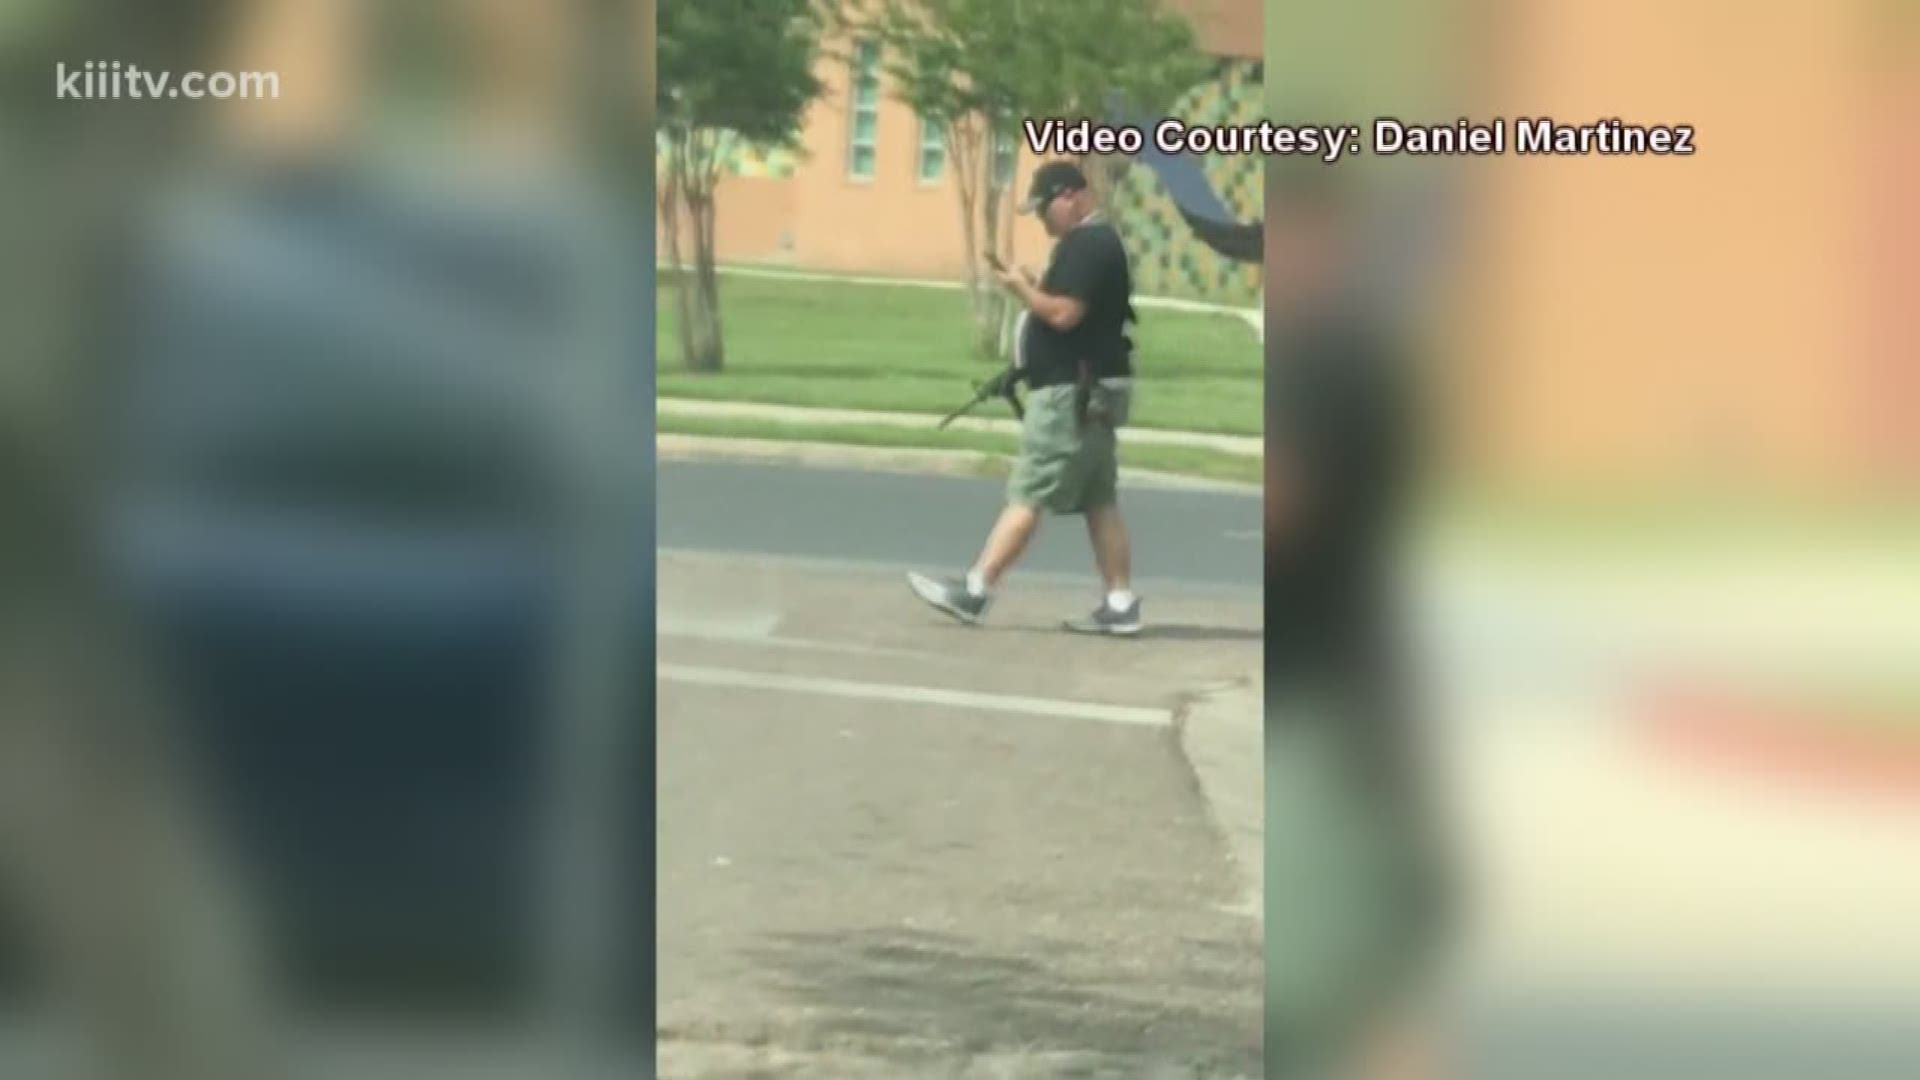 It was a sight that sparked safety concerns for parents and caused an elementary school to go on lockdown Tuesday afternoon – an armed man walking adjacent to the campus.